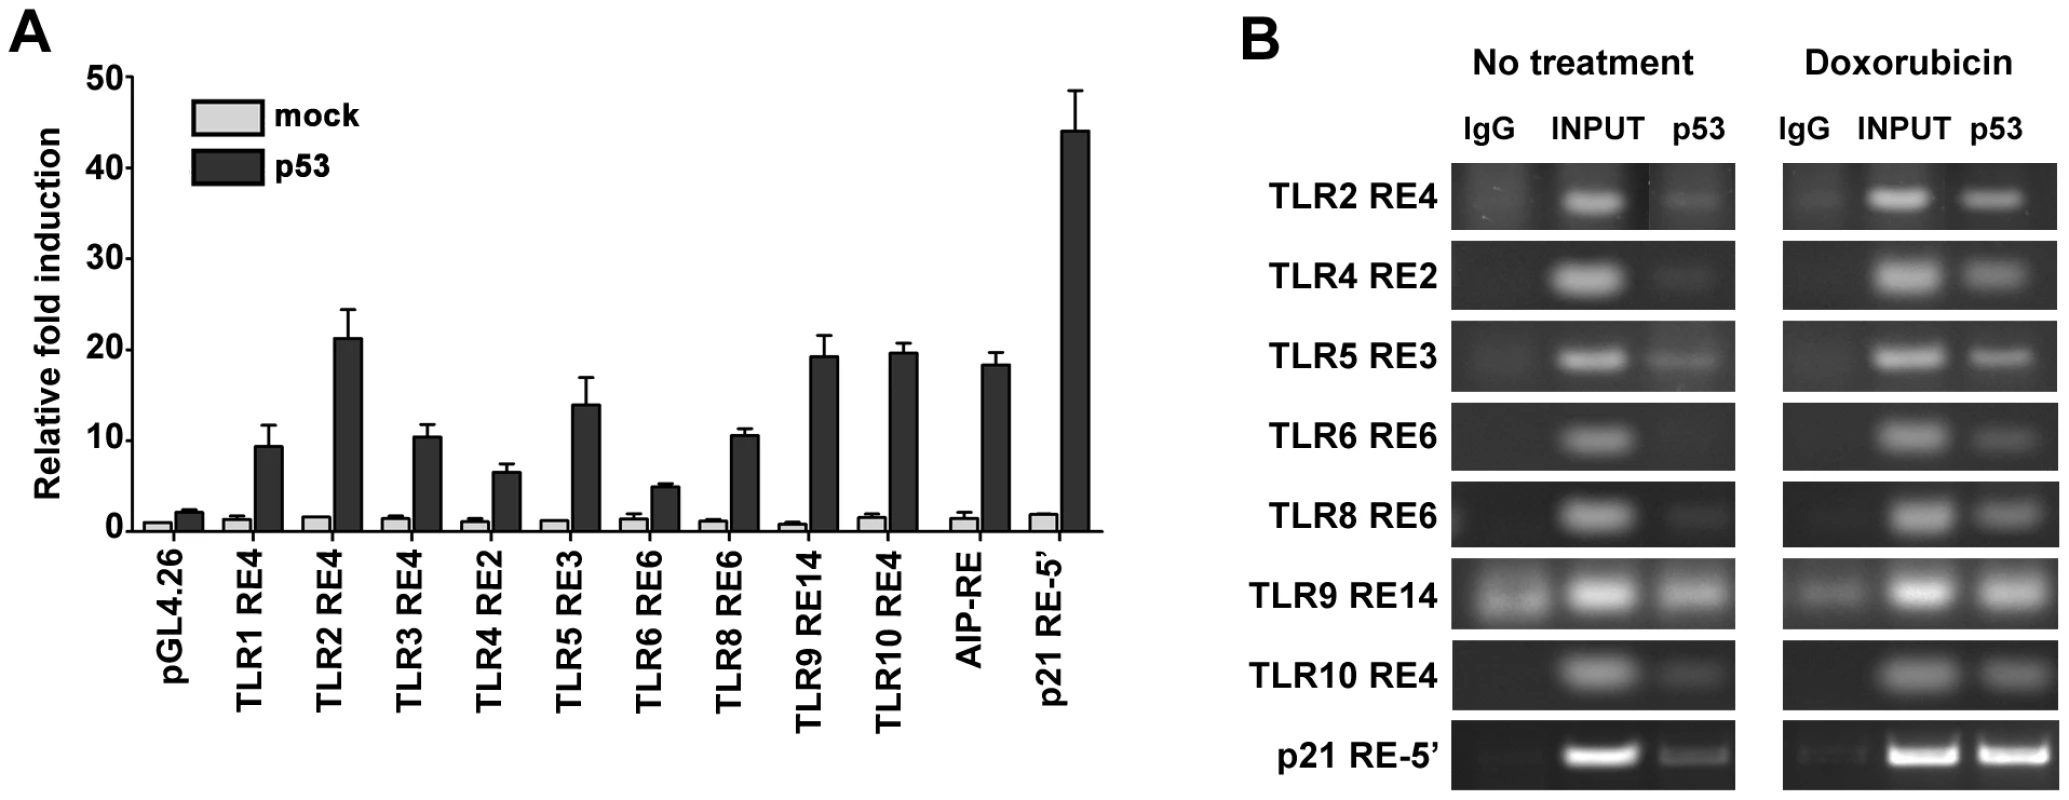 p53 drives expression of <i>TLR</i> family through direct binding to regulatory regions.